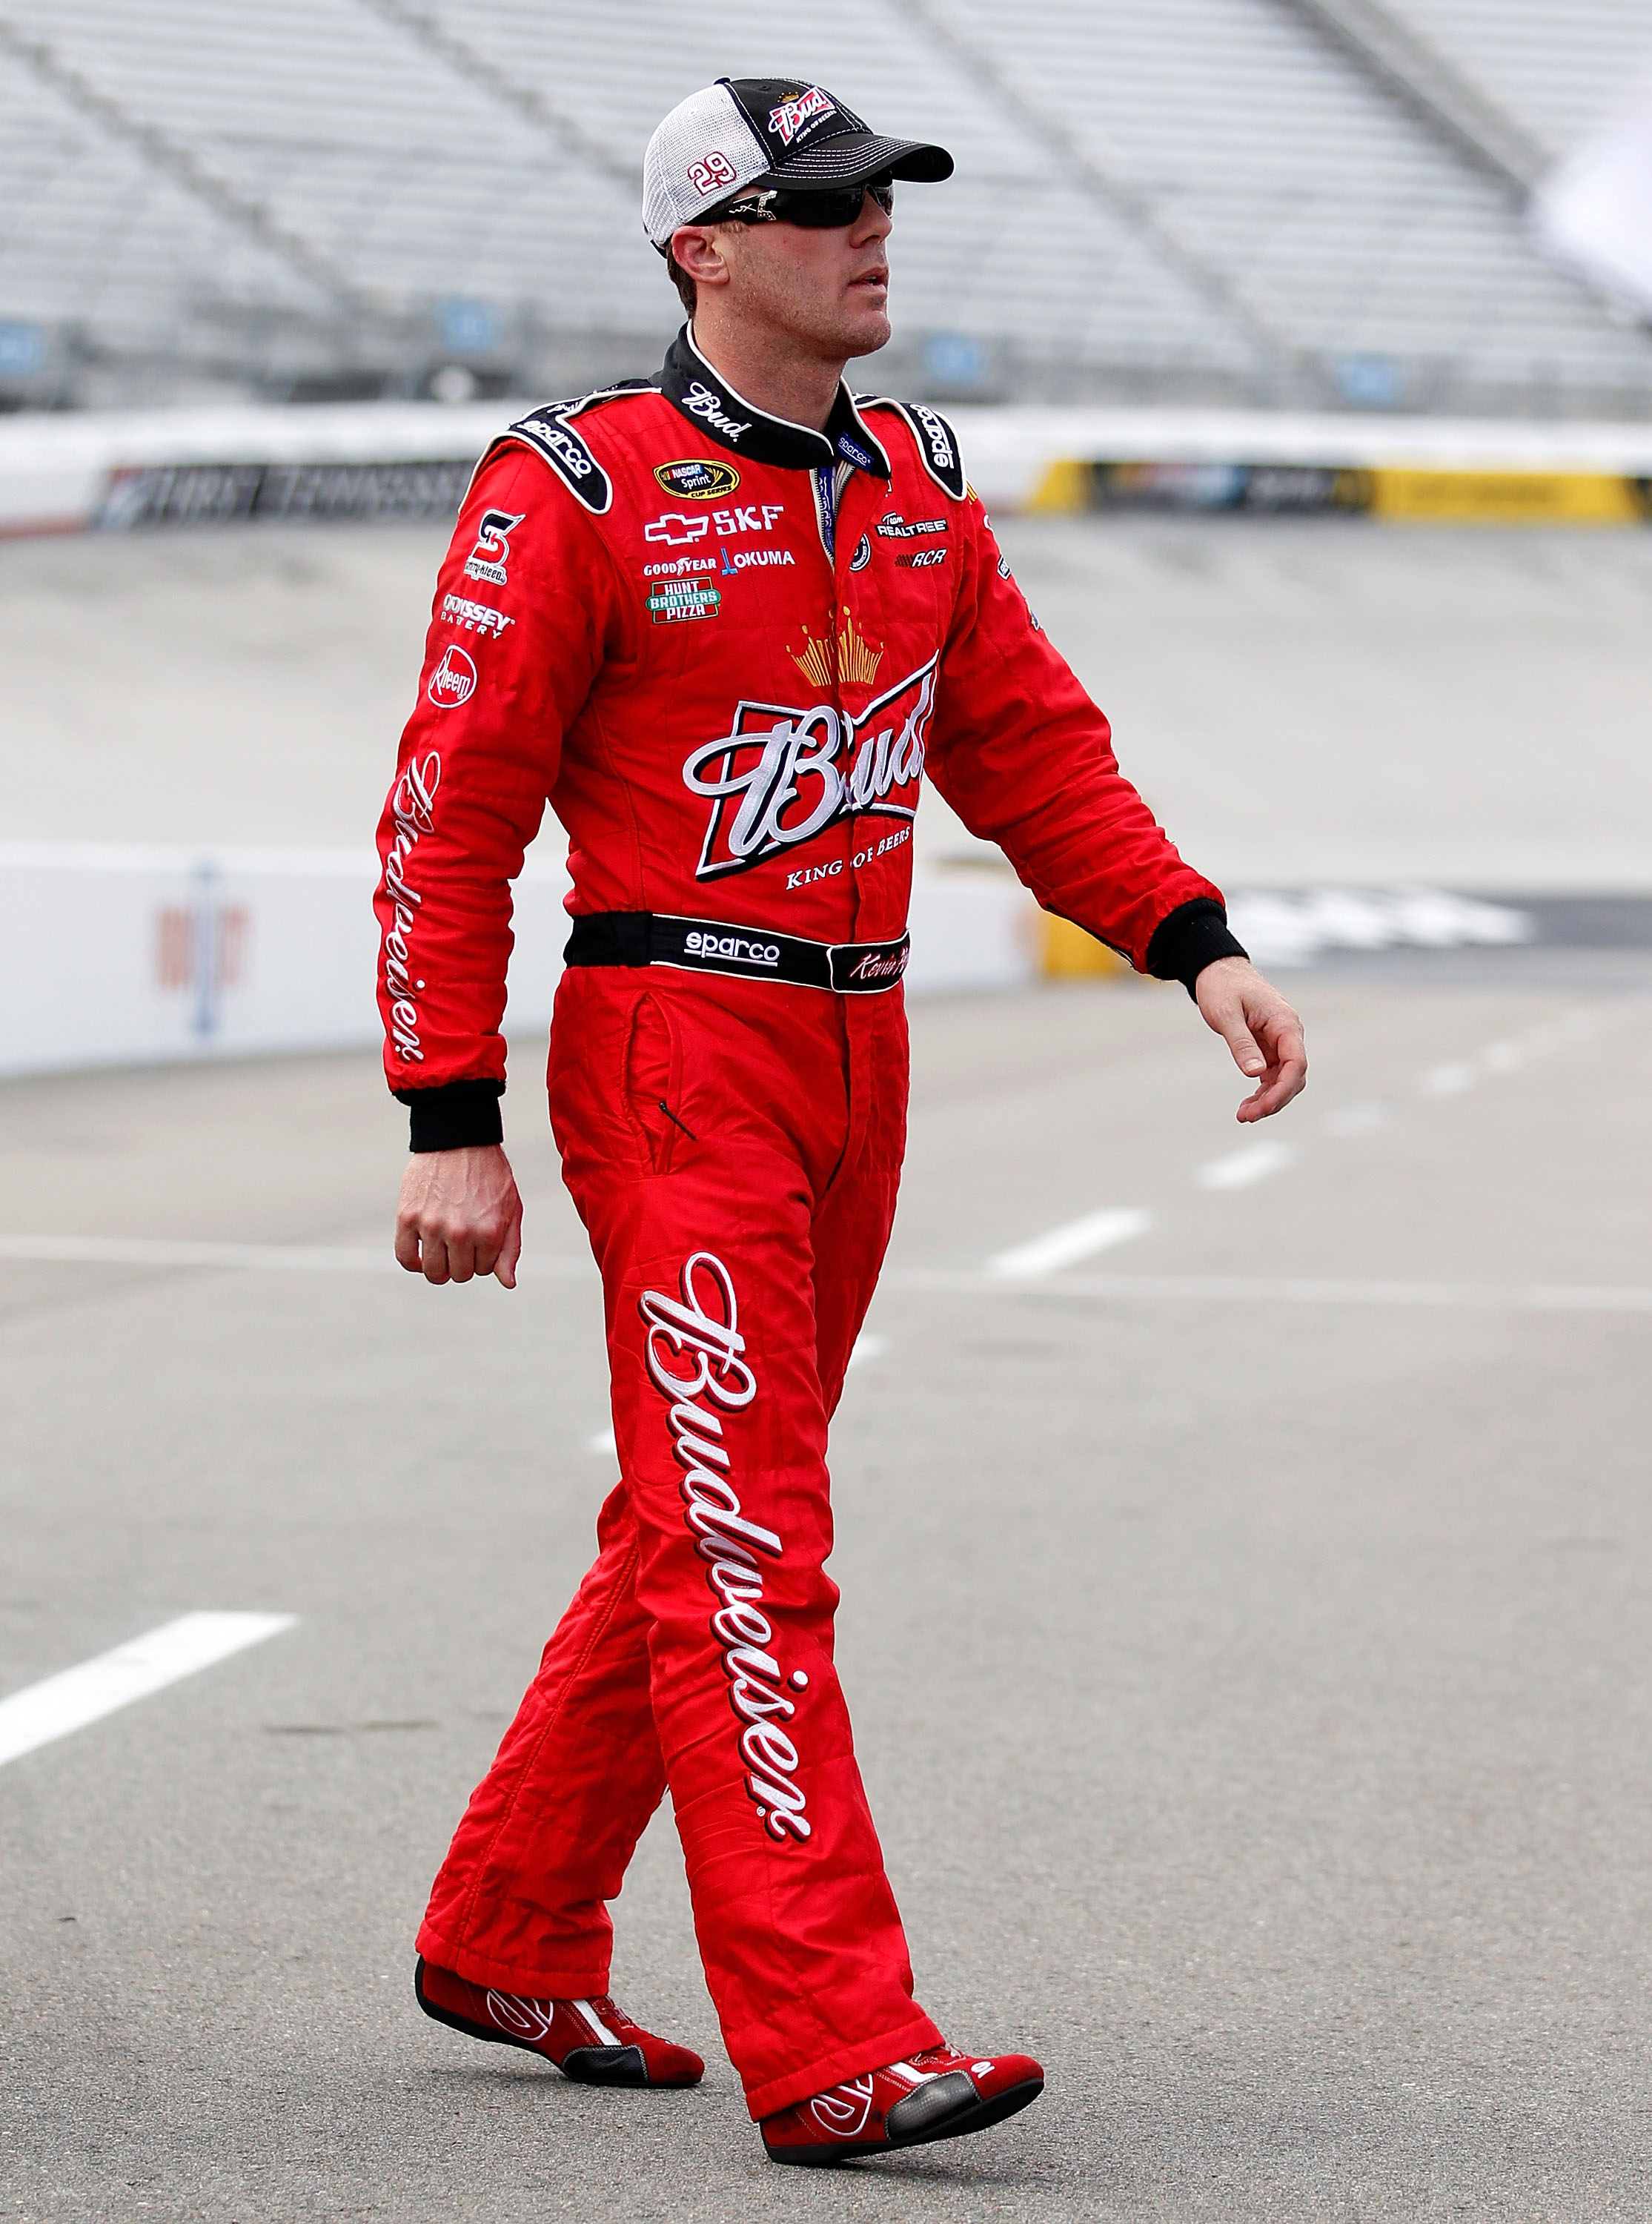 BRISTOL, TN - MARCH 18: Kevin Harvick, driver of the #29 Budweiser Chevrolet, walks from his car after qualifying for the NASCAR Sprint Cup Series Jeff Byrd 500 Presented By Food City at Bristol Motor Speedway on March 18, 2011 in Bristol, Tennessee.  (Ph